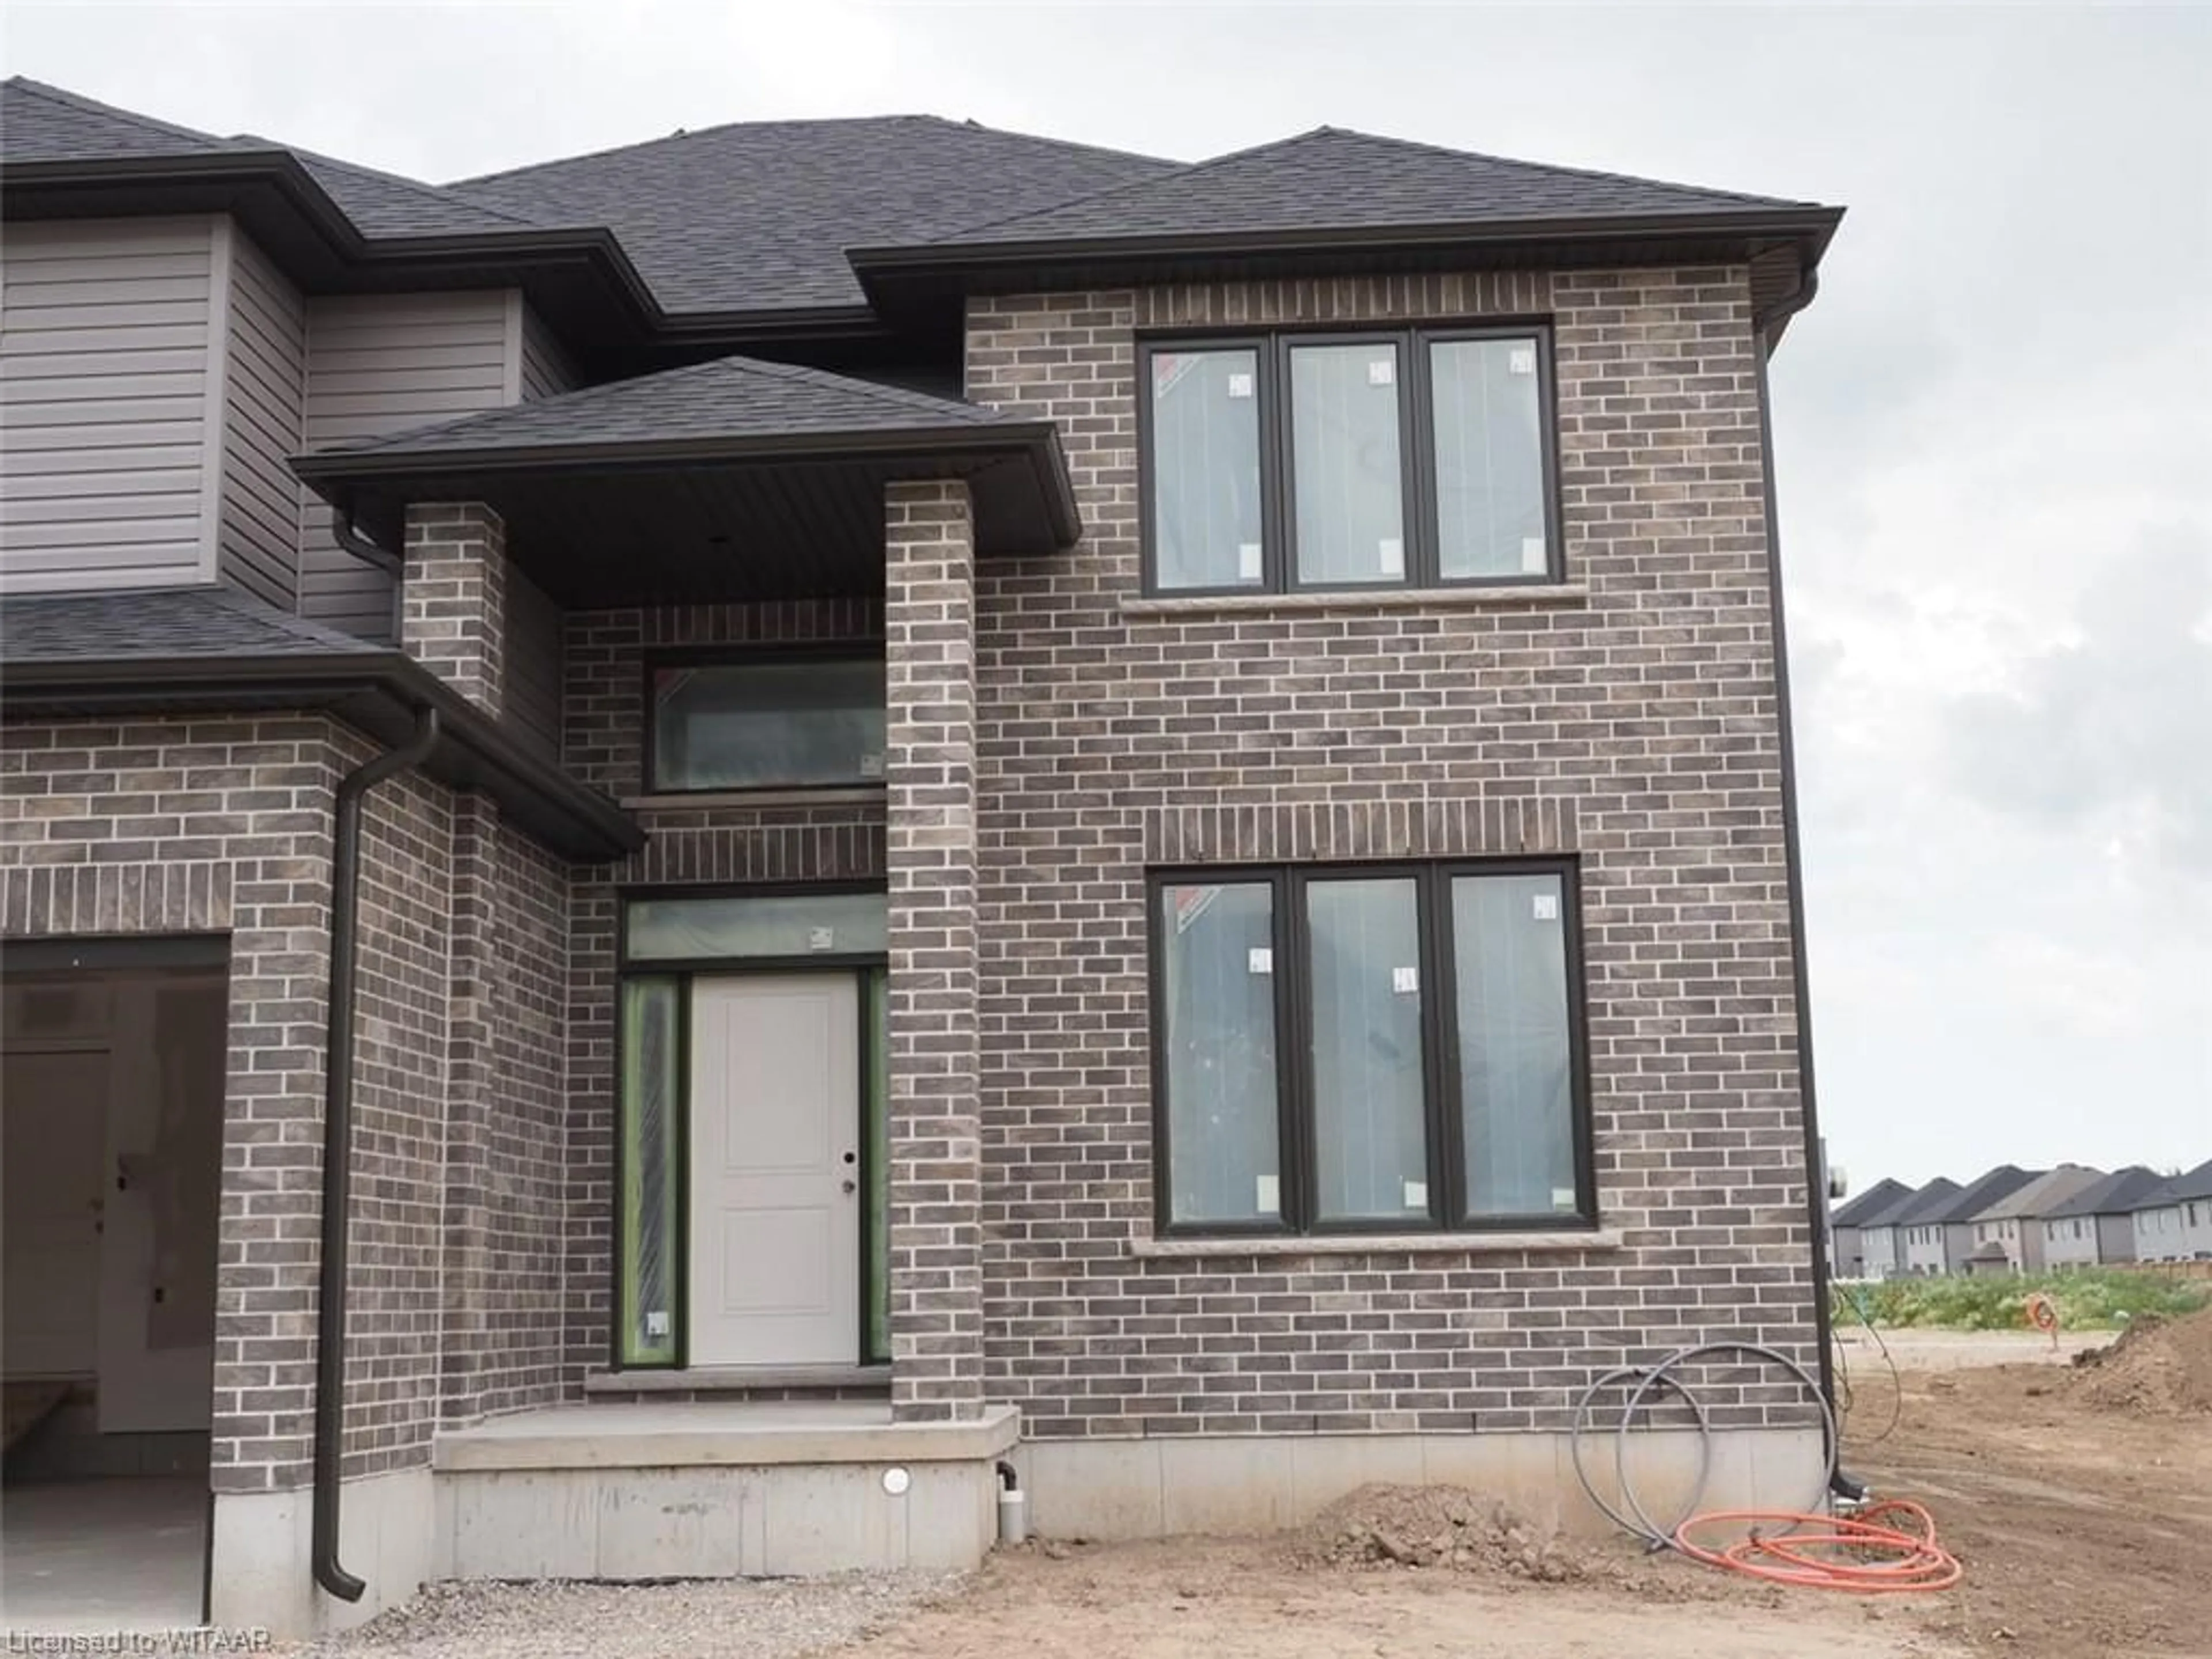 Home with brick exterior material for LOT 82 Sycamore Dr, Tillsonburg Ontario N4G 5R9